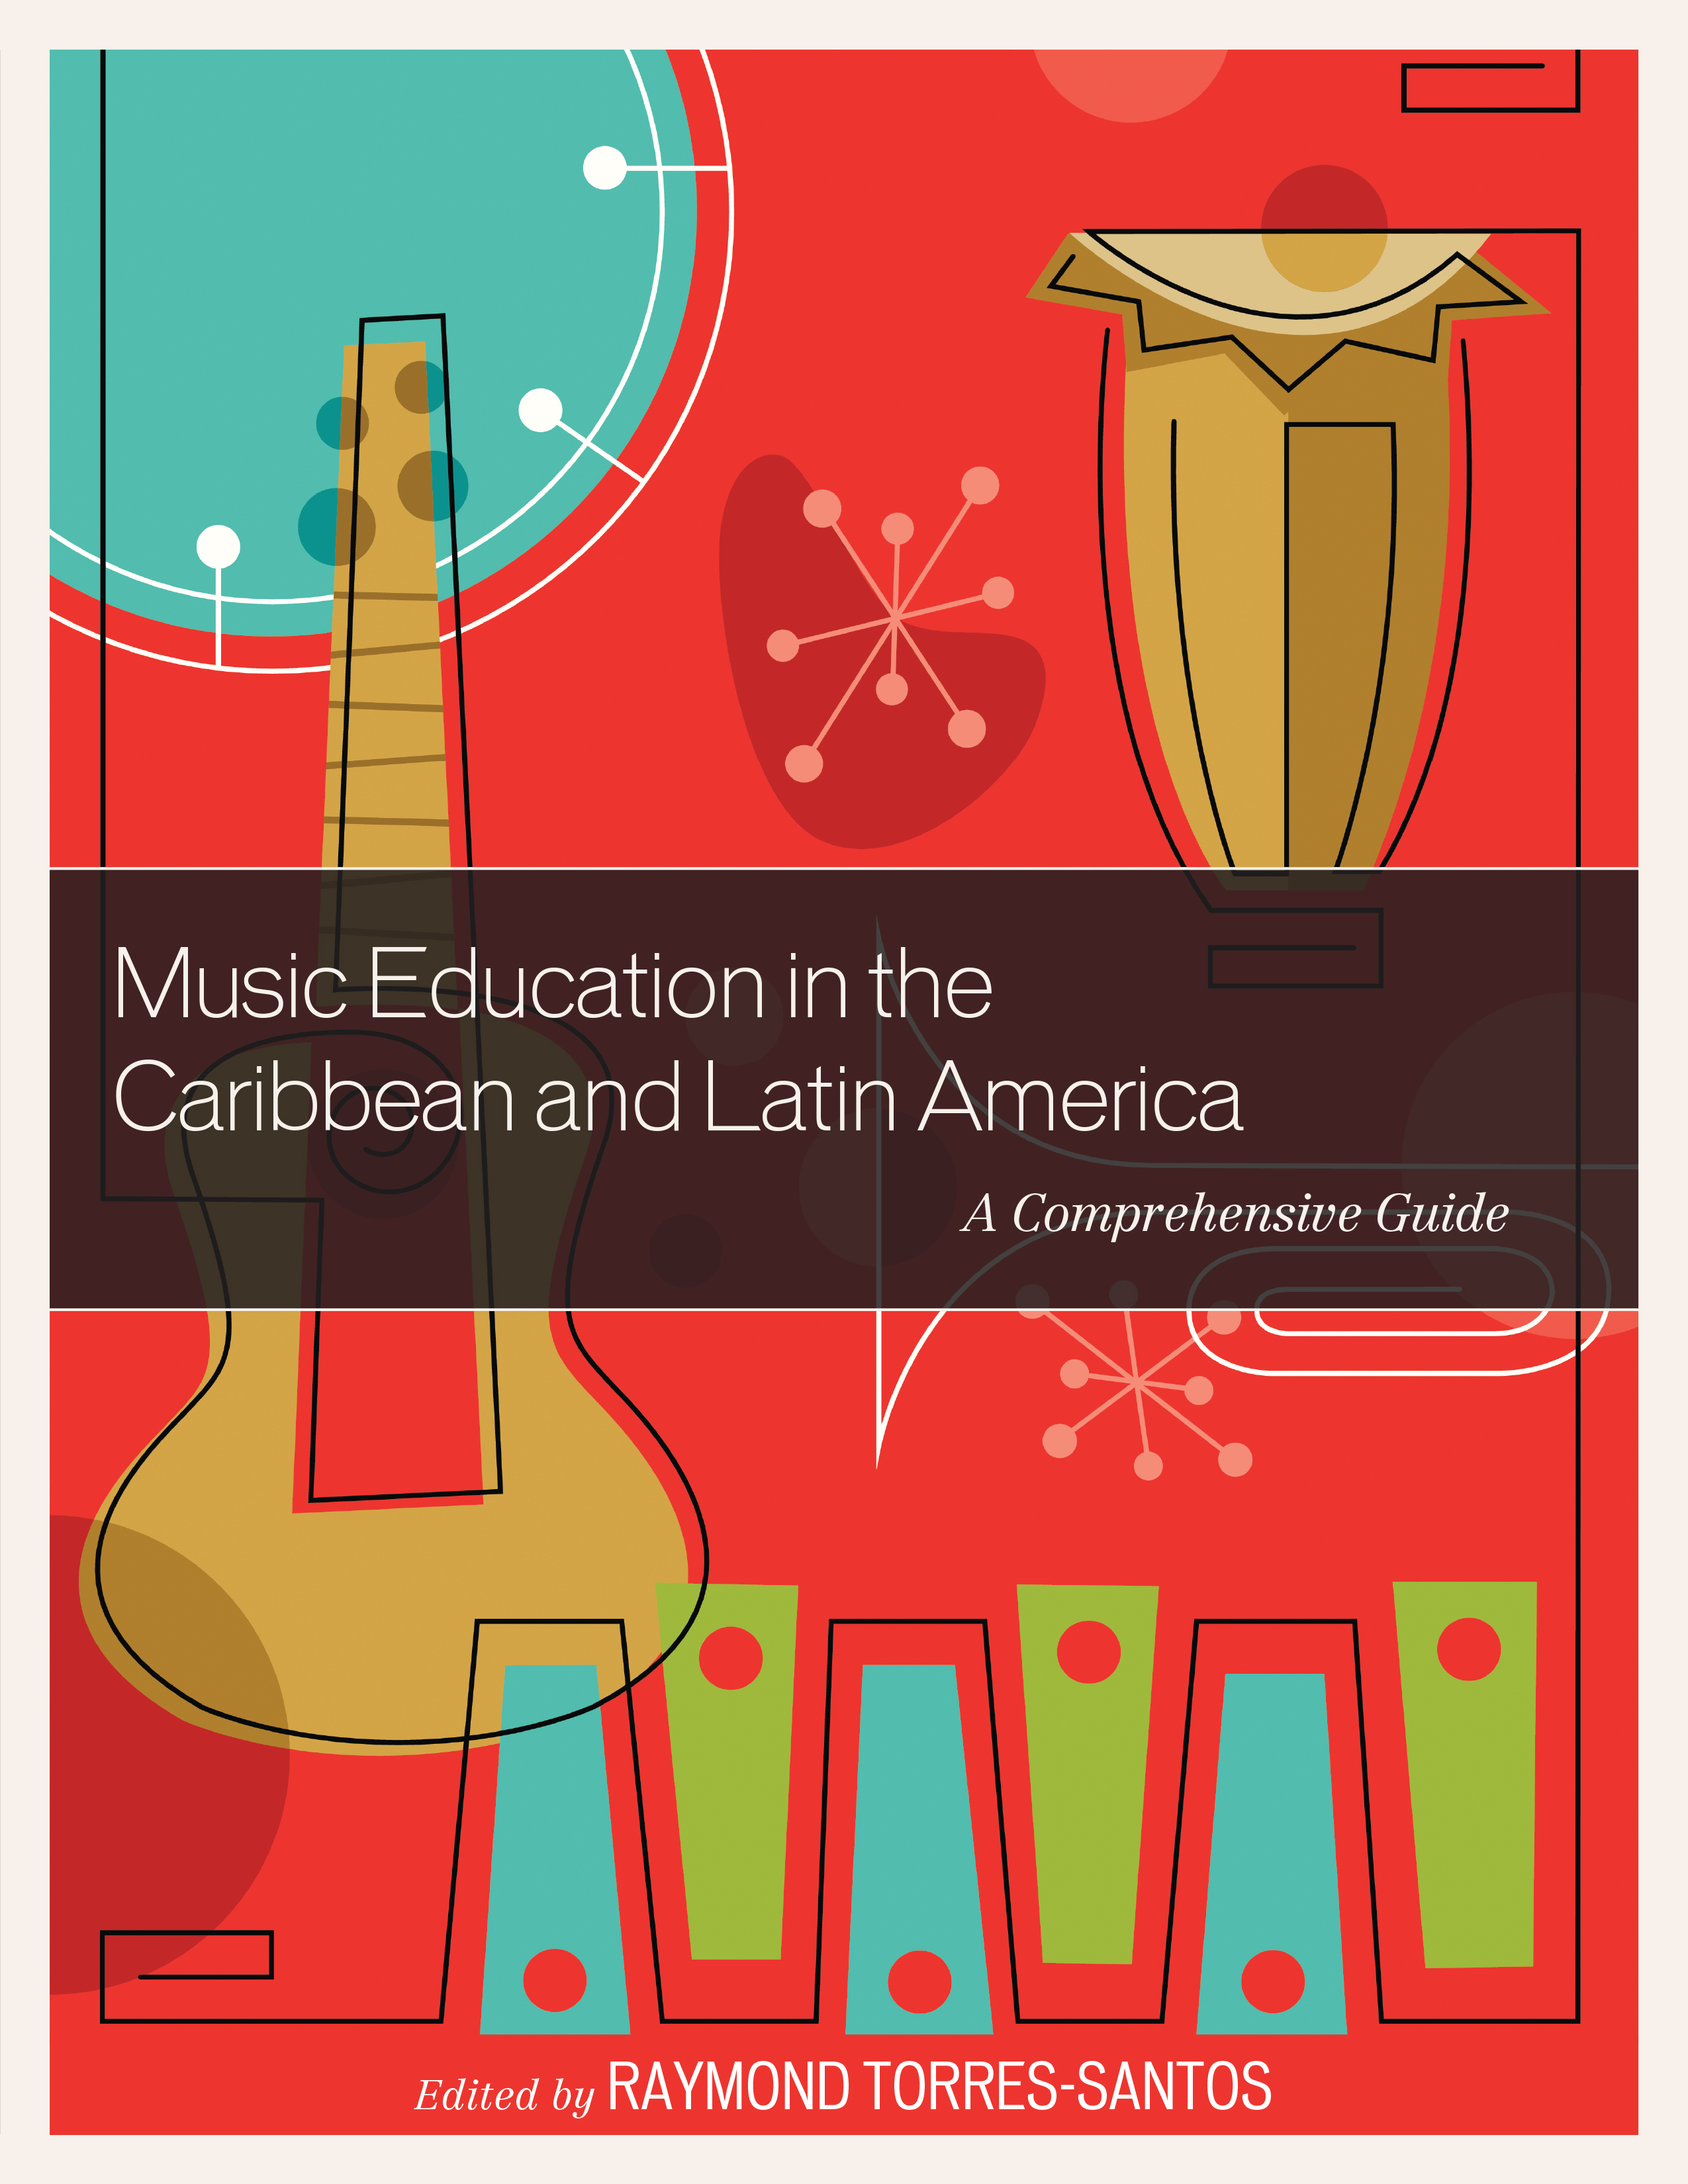 Music Education in the Caribbean and Latin America: A Comprehensive Guide